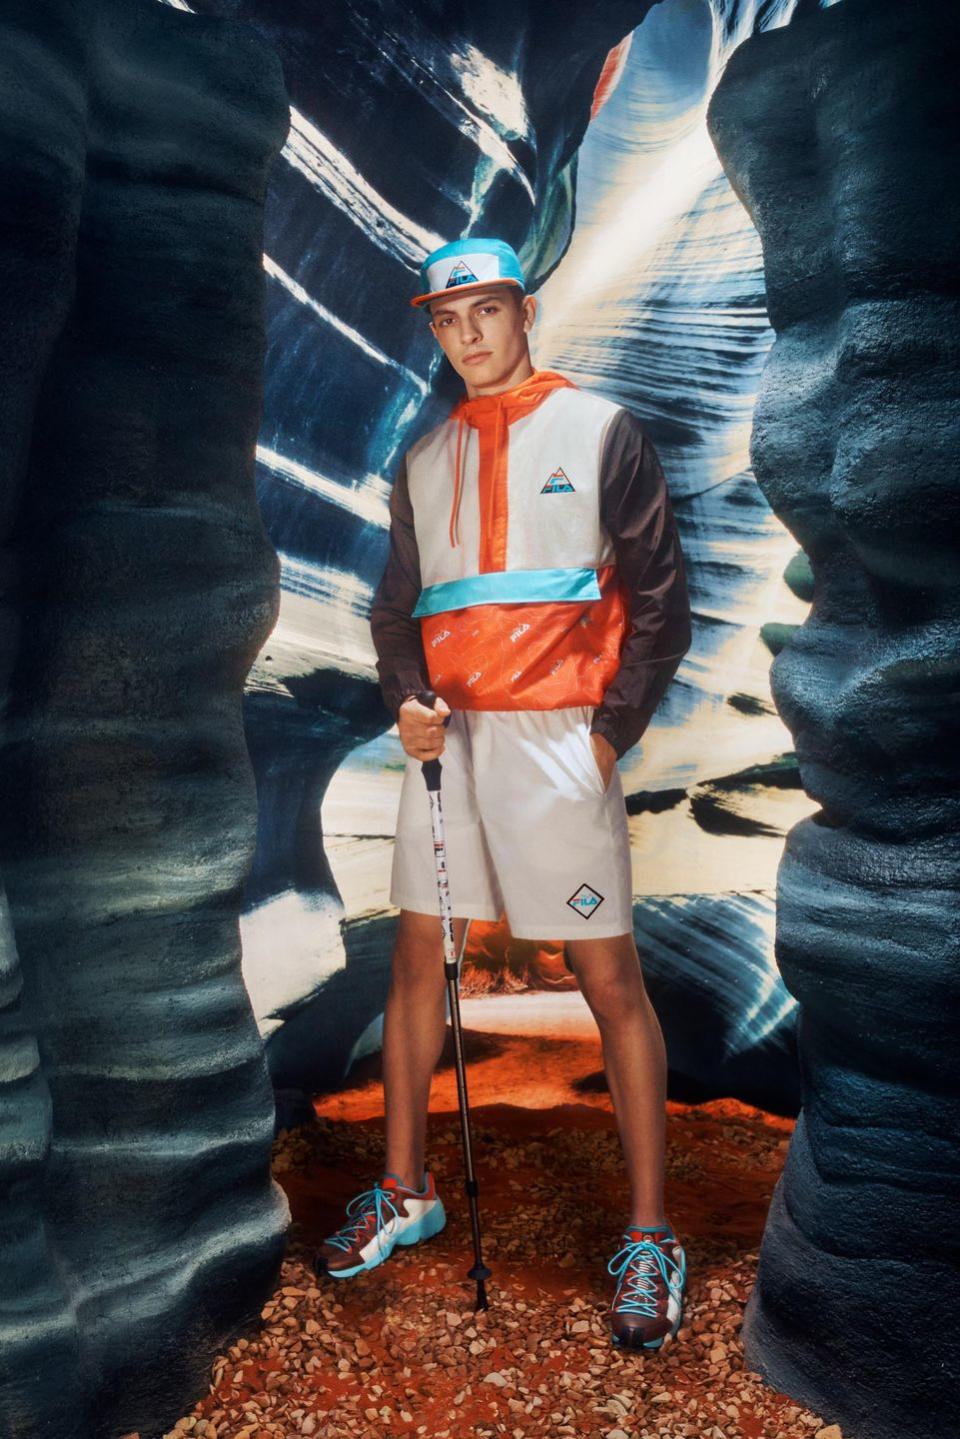 Did Fila Just Make Us Want to Go Hiking?